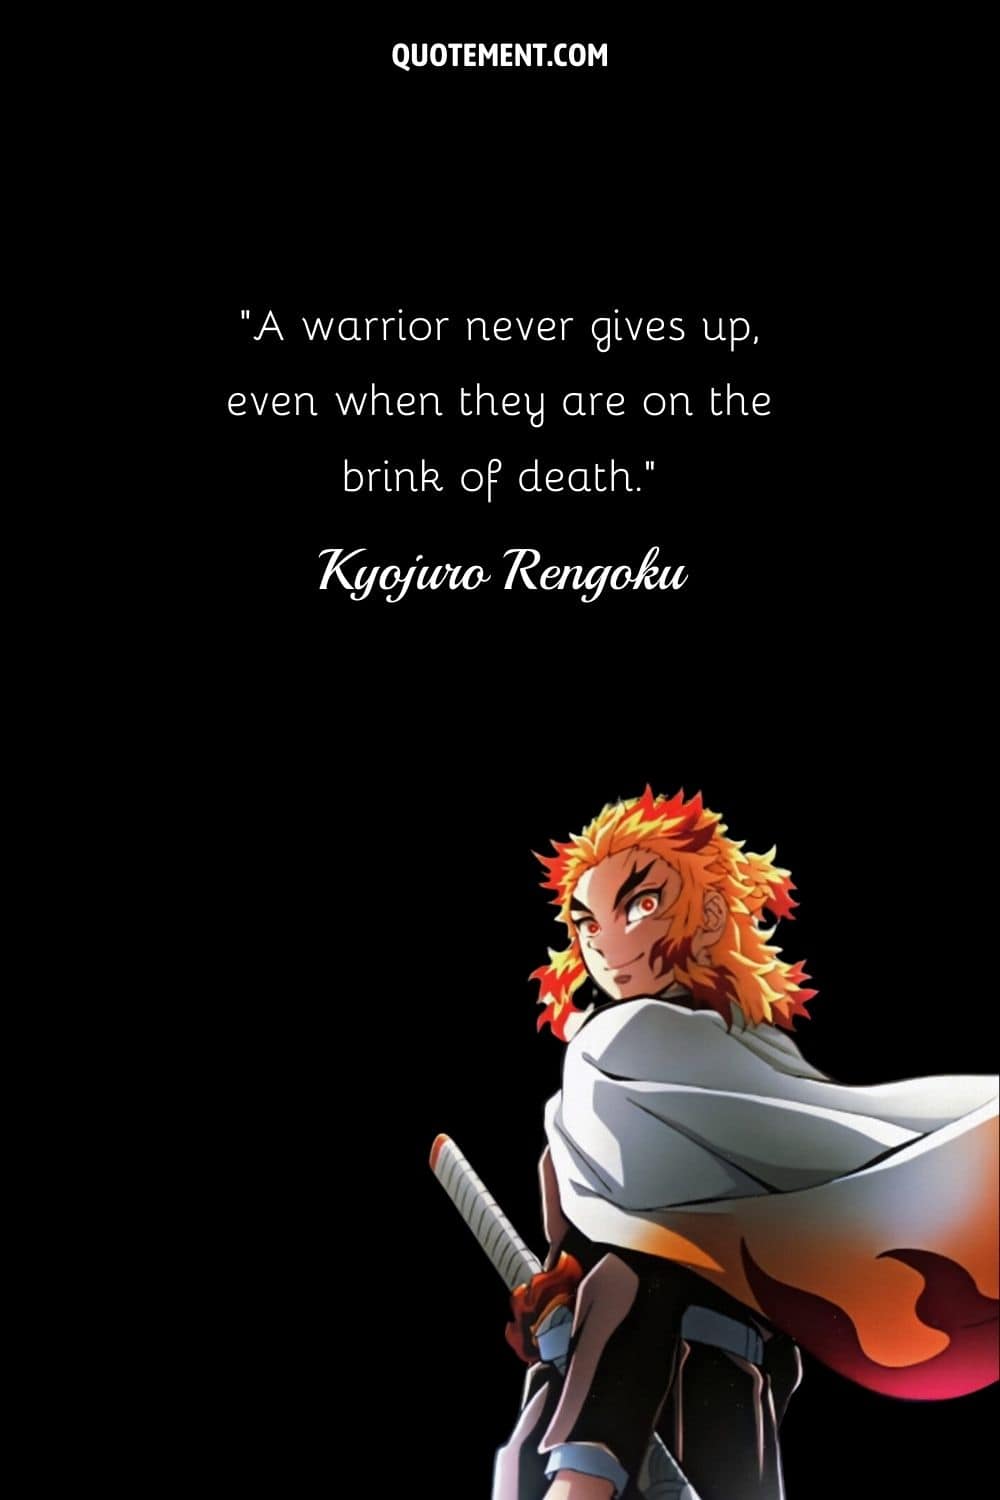 A warrior never gives up, even when they are on the brink of death